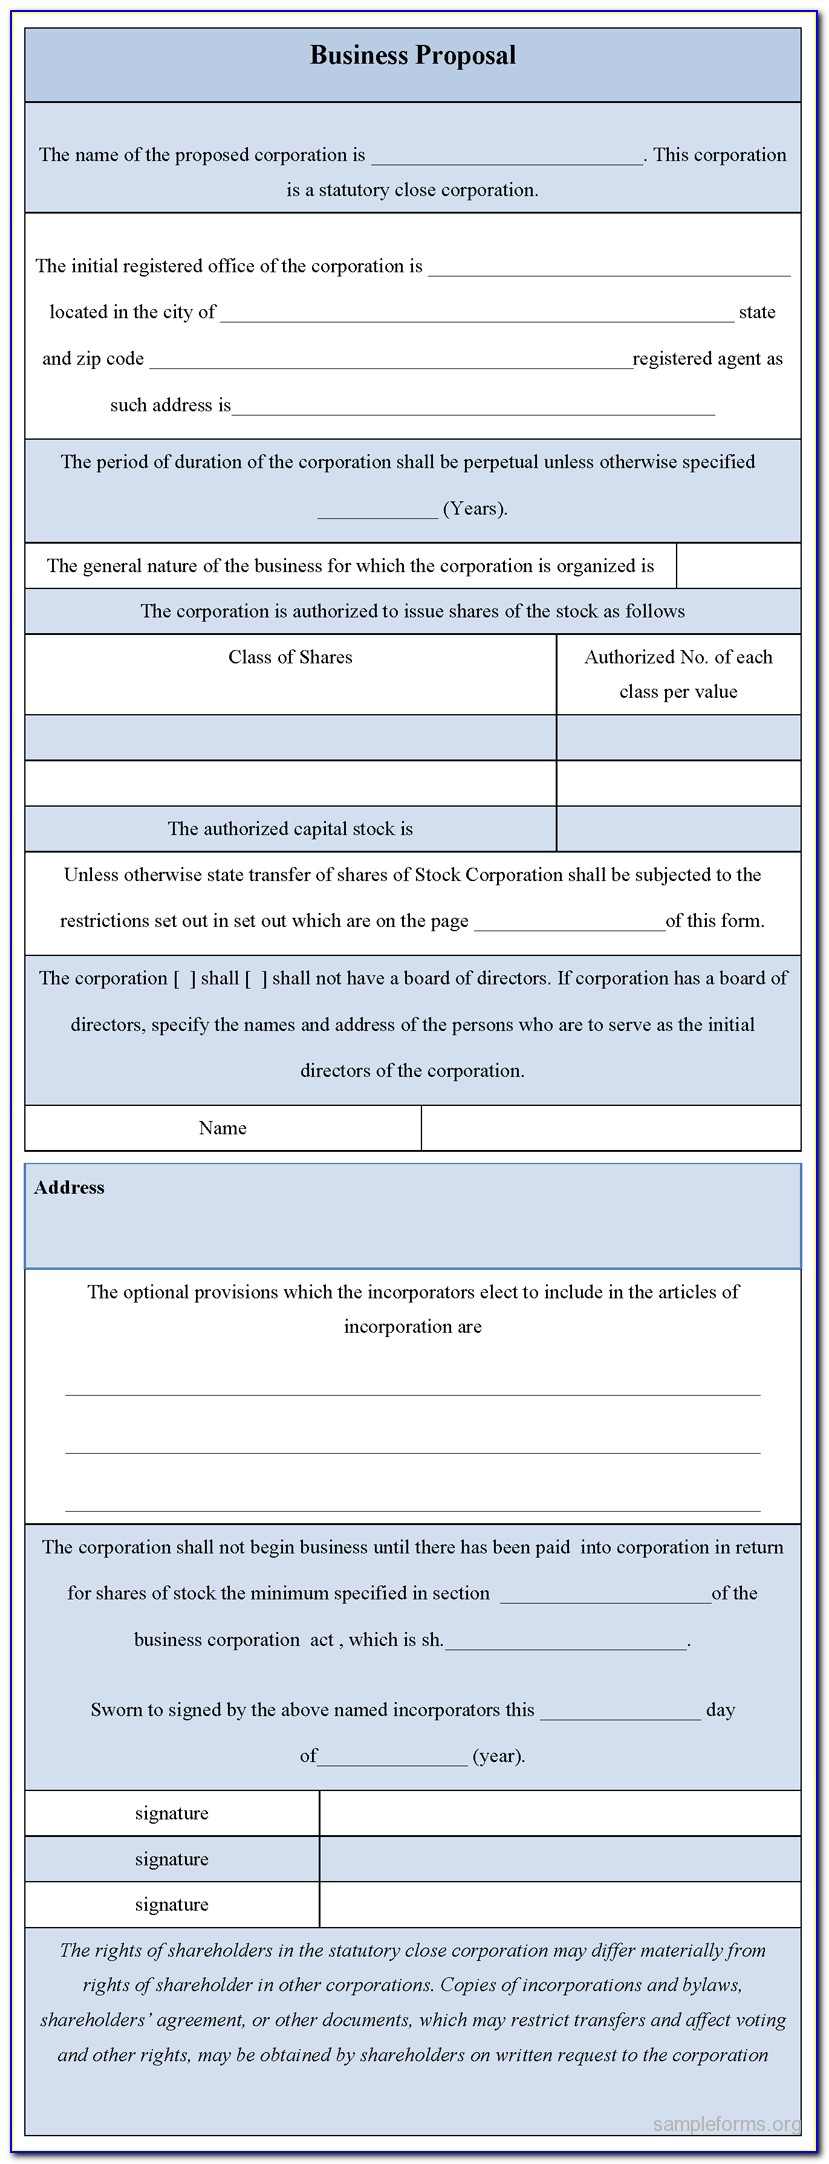 Free Business Proposal Forms